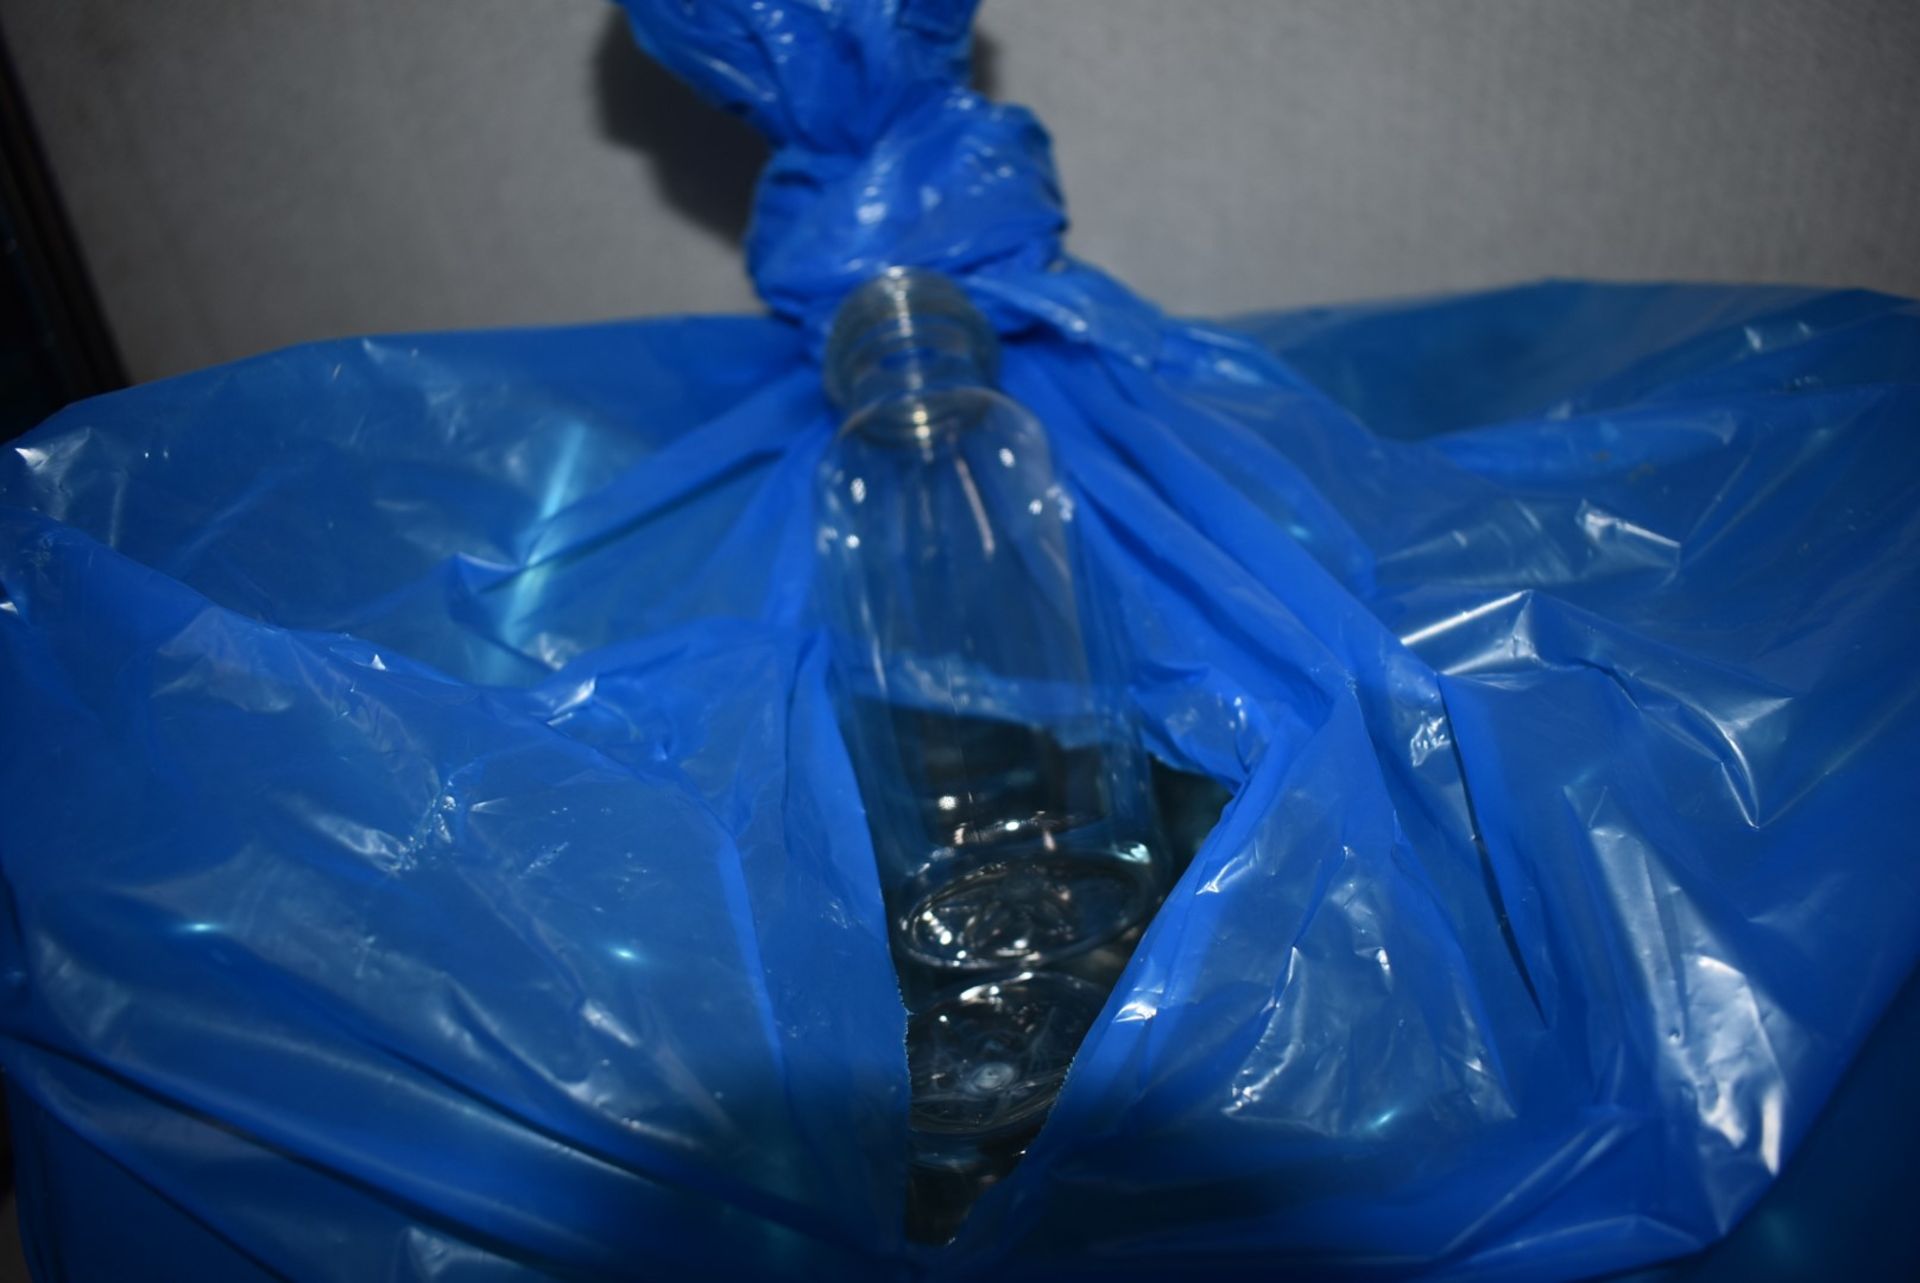 1 x Large Bag of Unused Plastic Bottles - Recently Removed From a Vegan Deli - CL999 - Ref: SL190 - Image 6 of 6